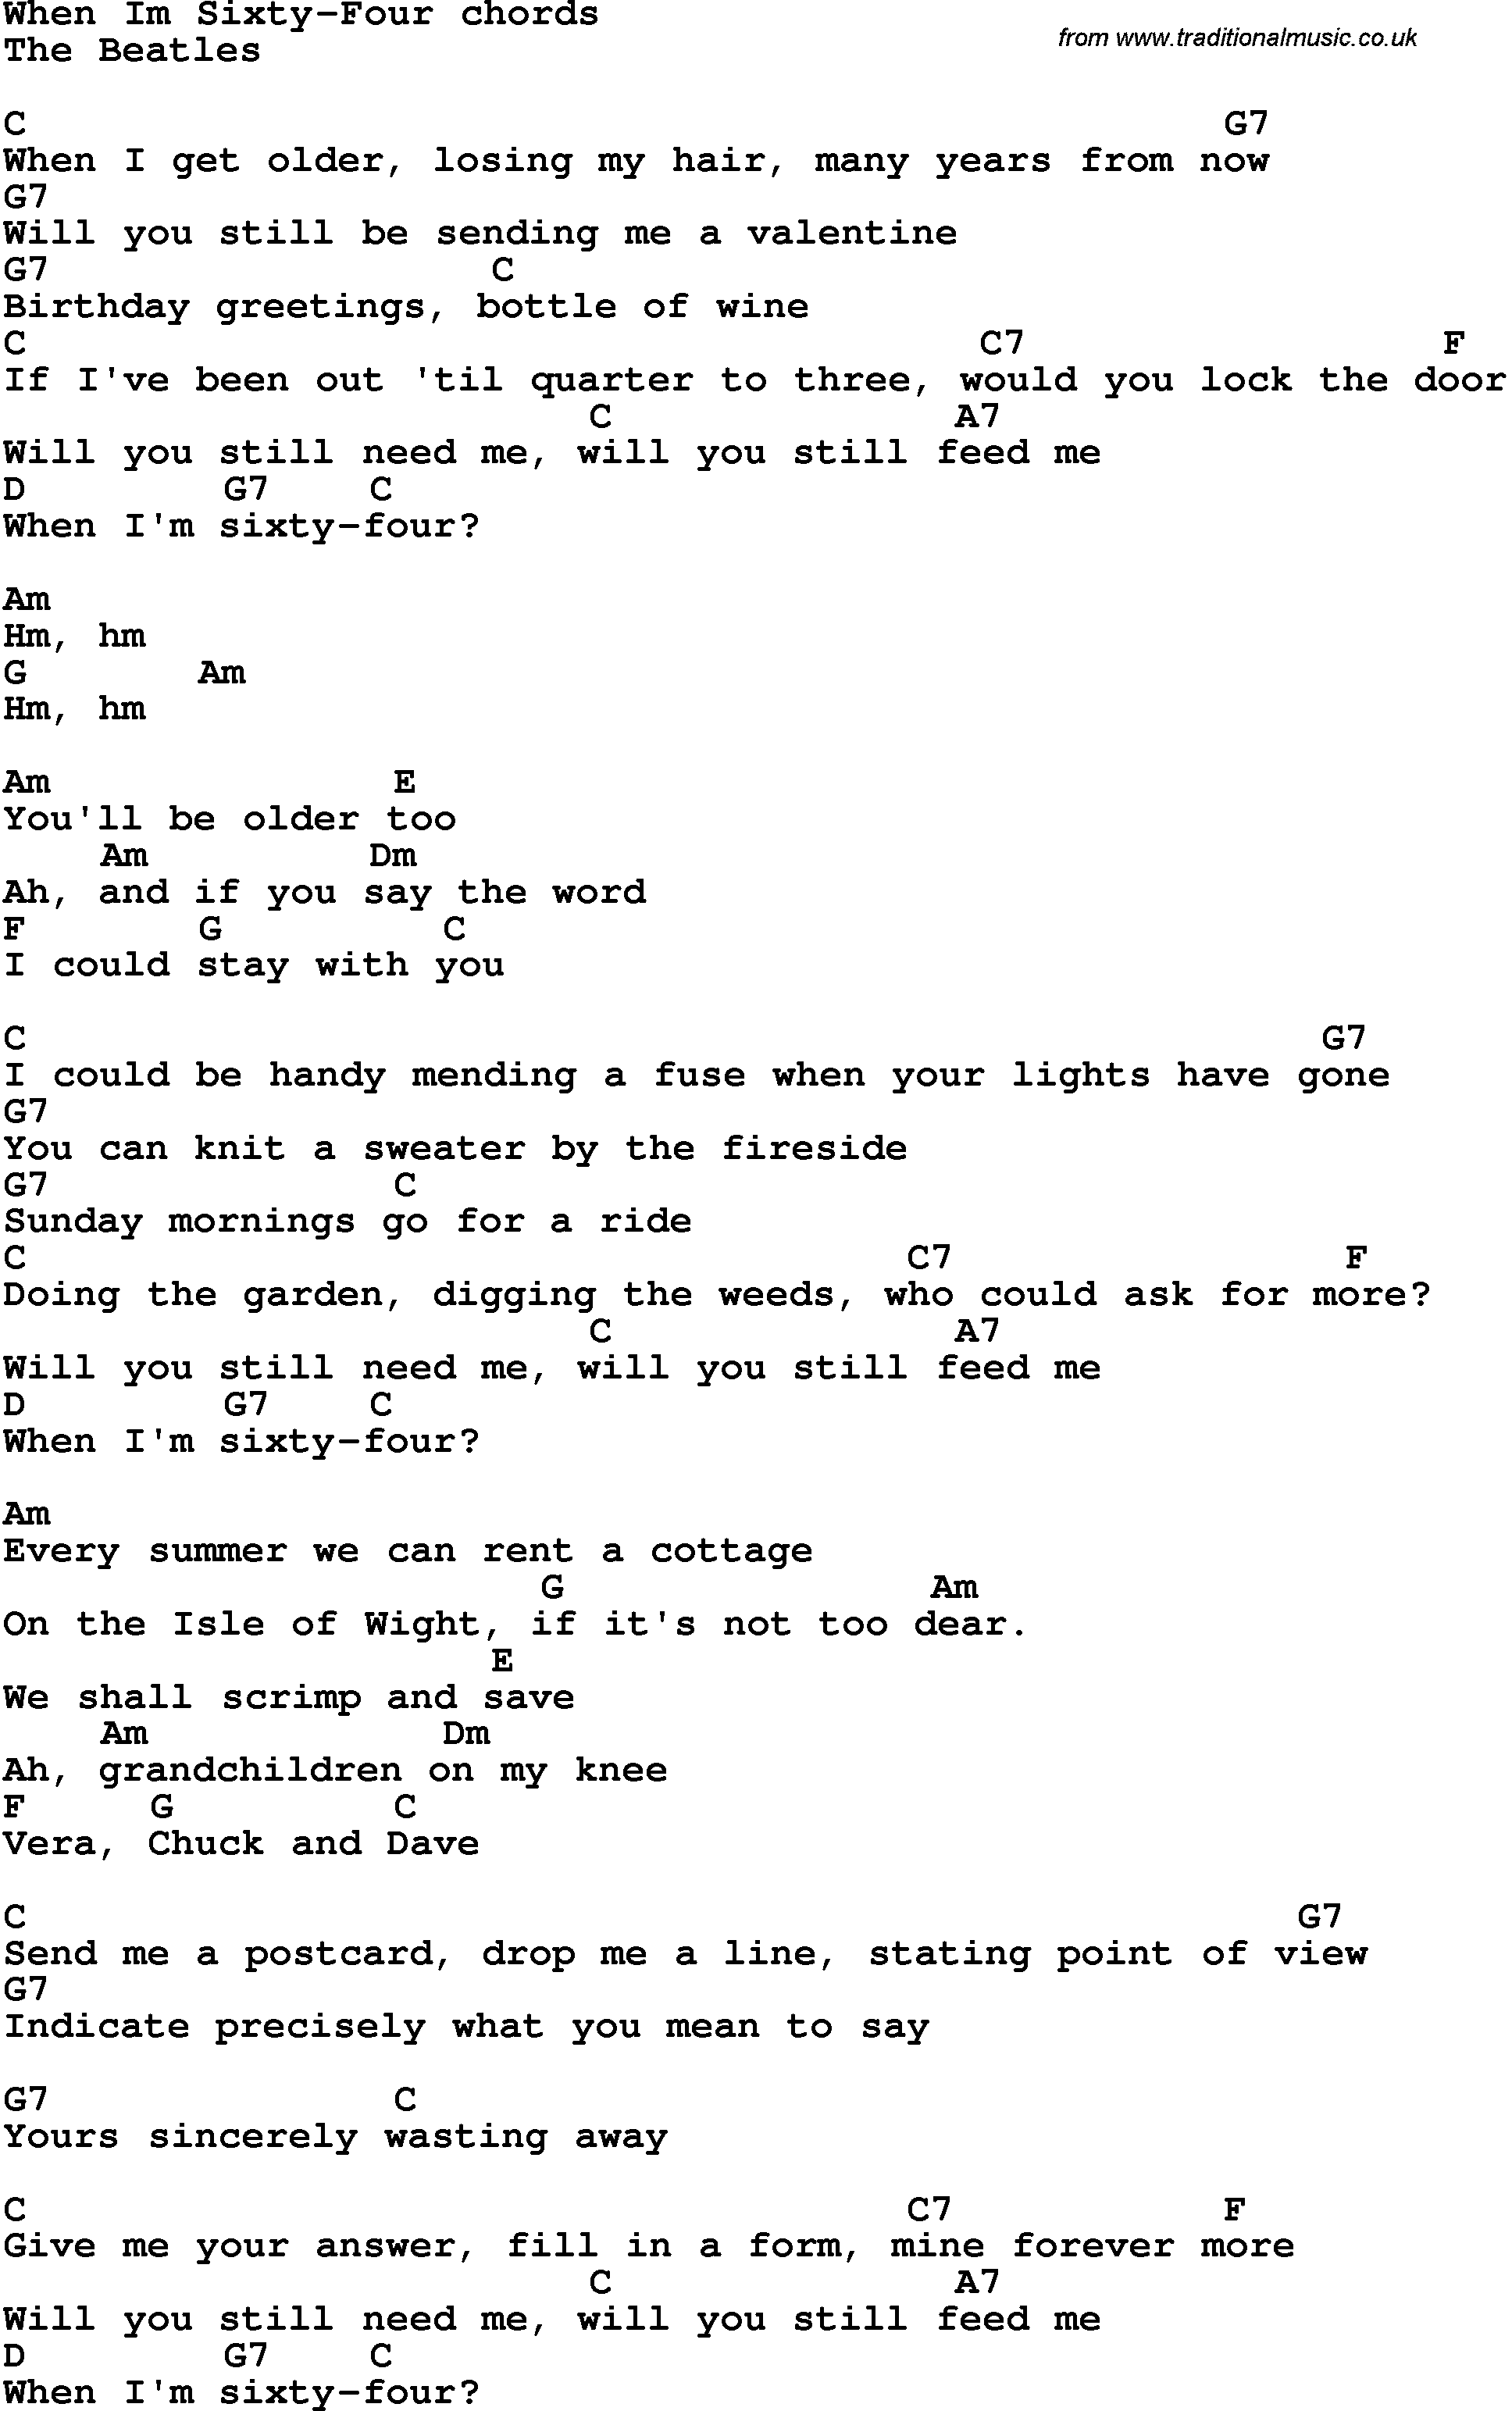 Song Lyrics With Guitar Chords For When Im 64 The Beatles